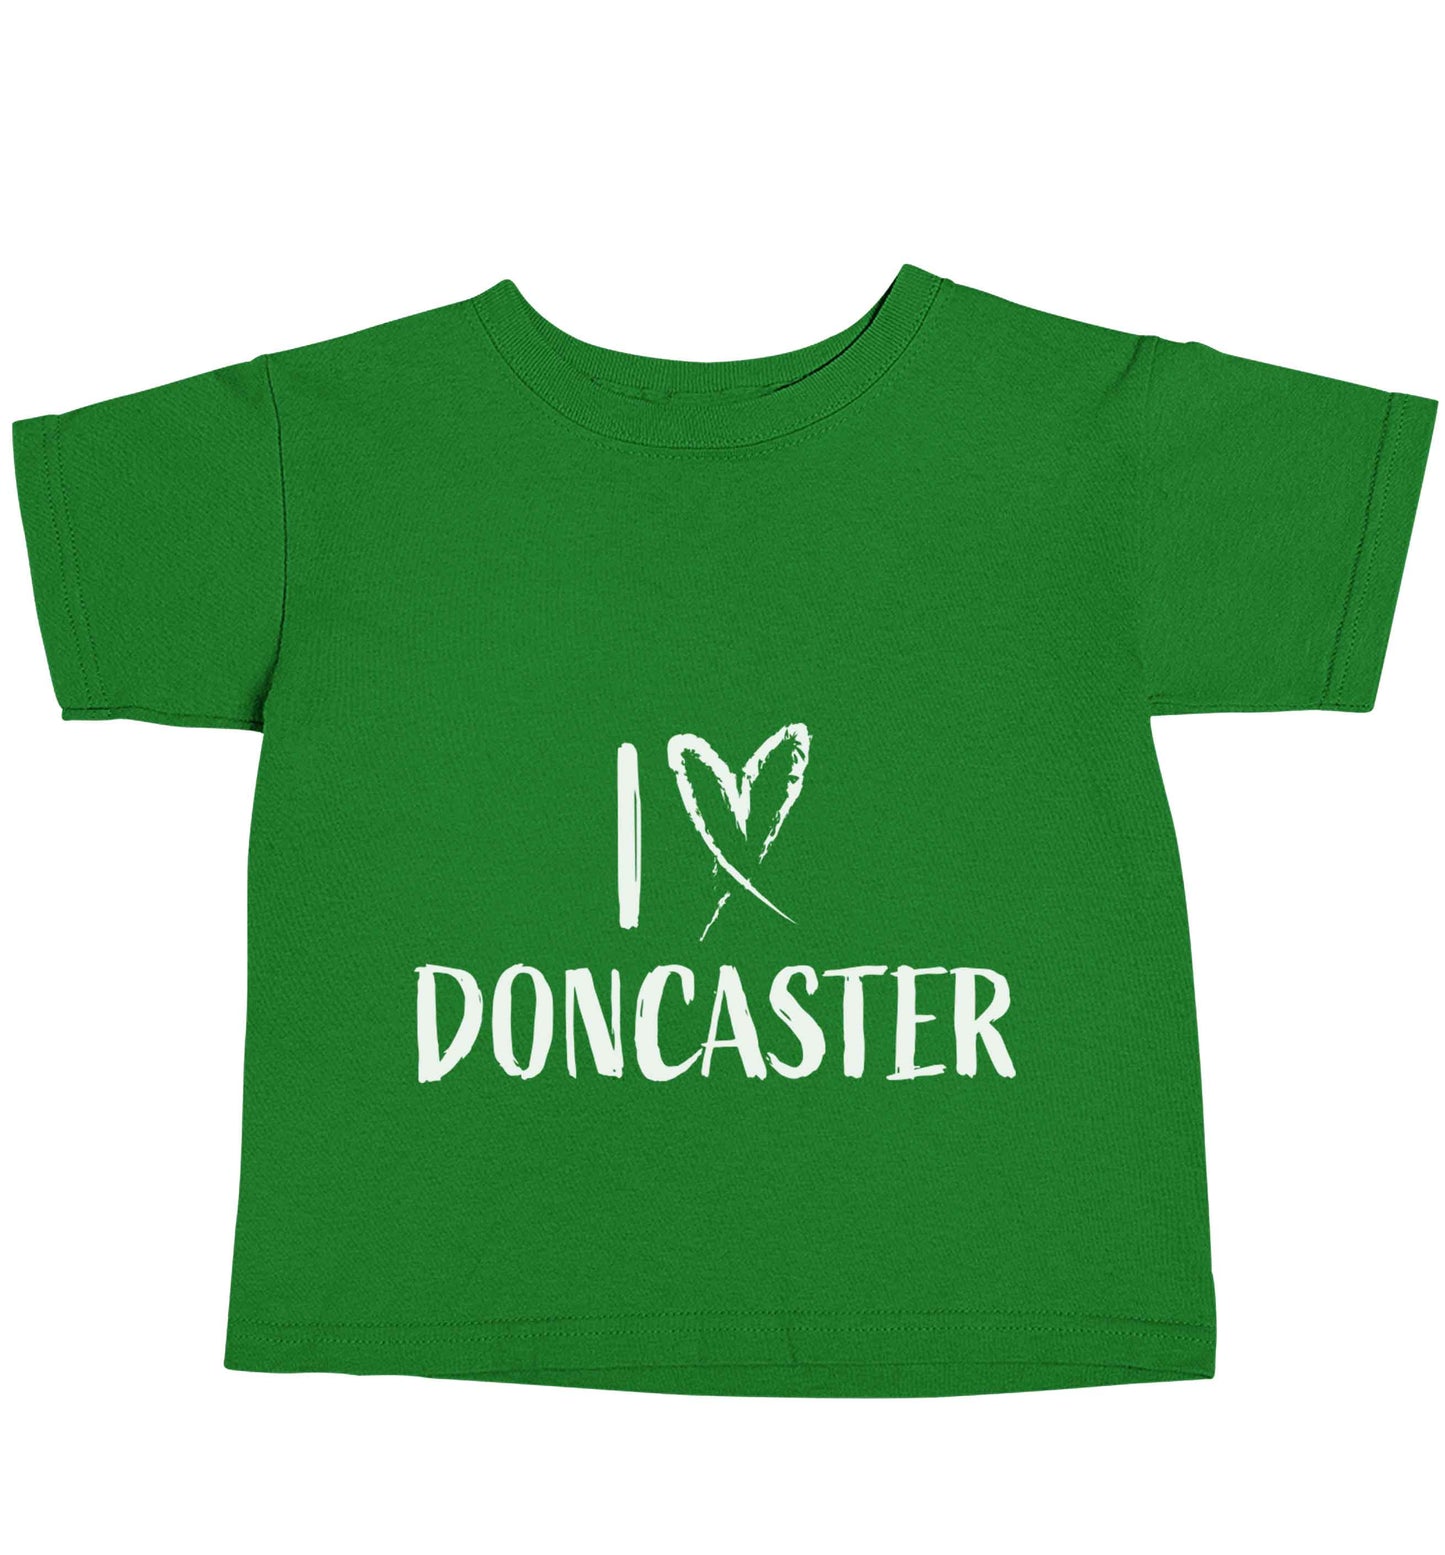 I love Doncaster green baby toddler Tshirt 2 Years